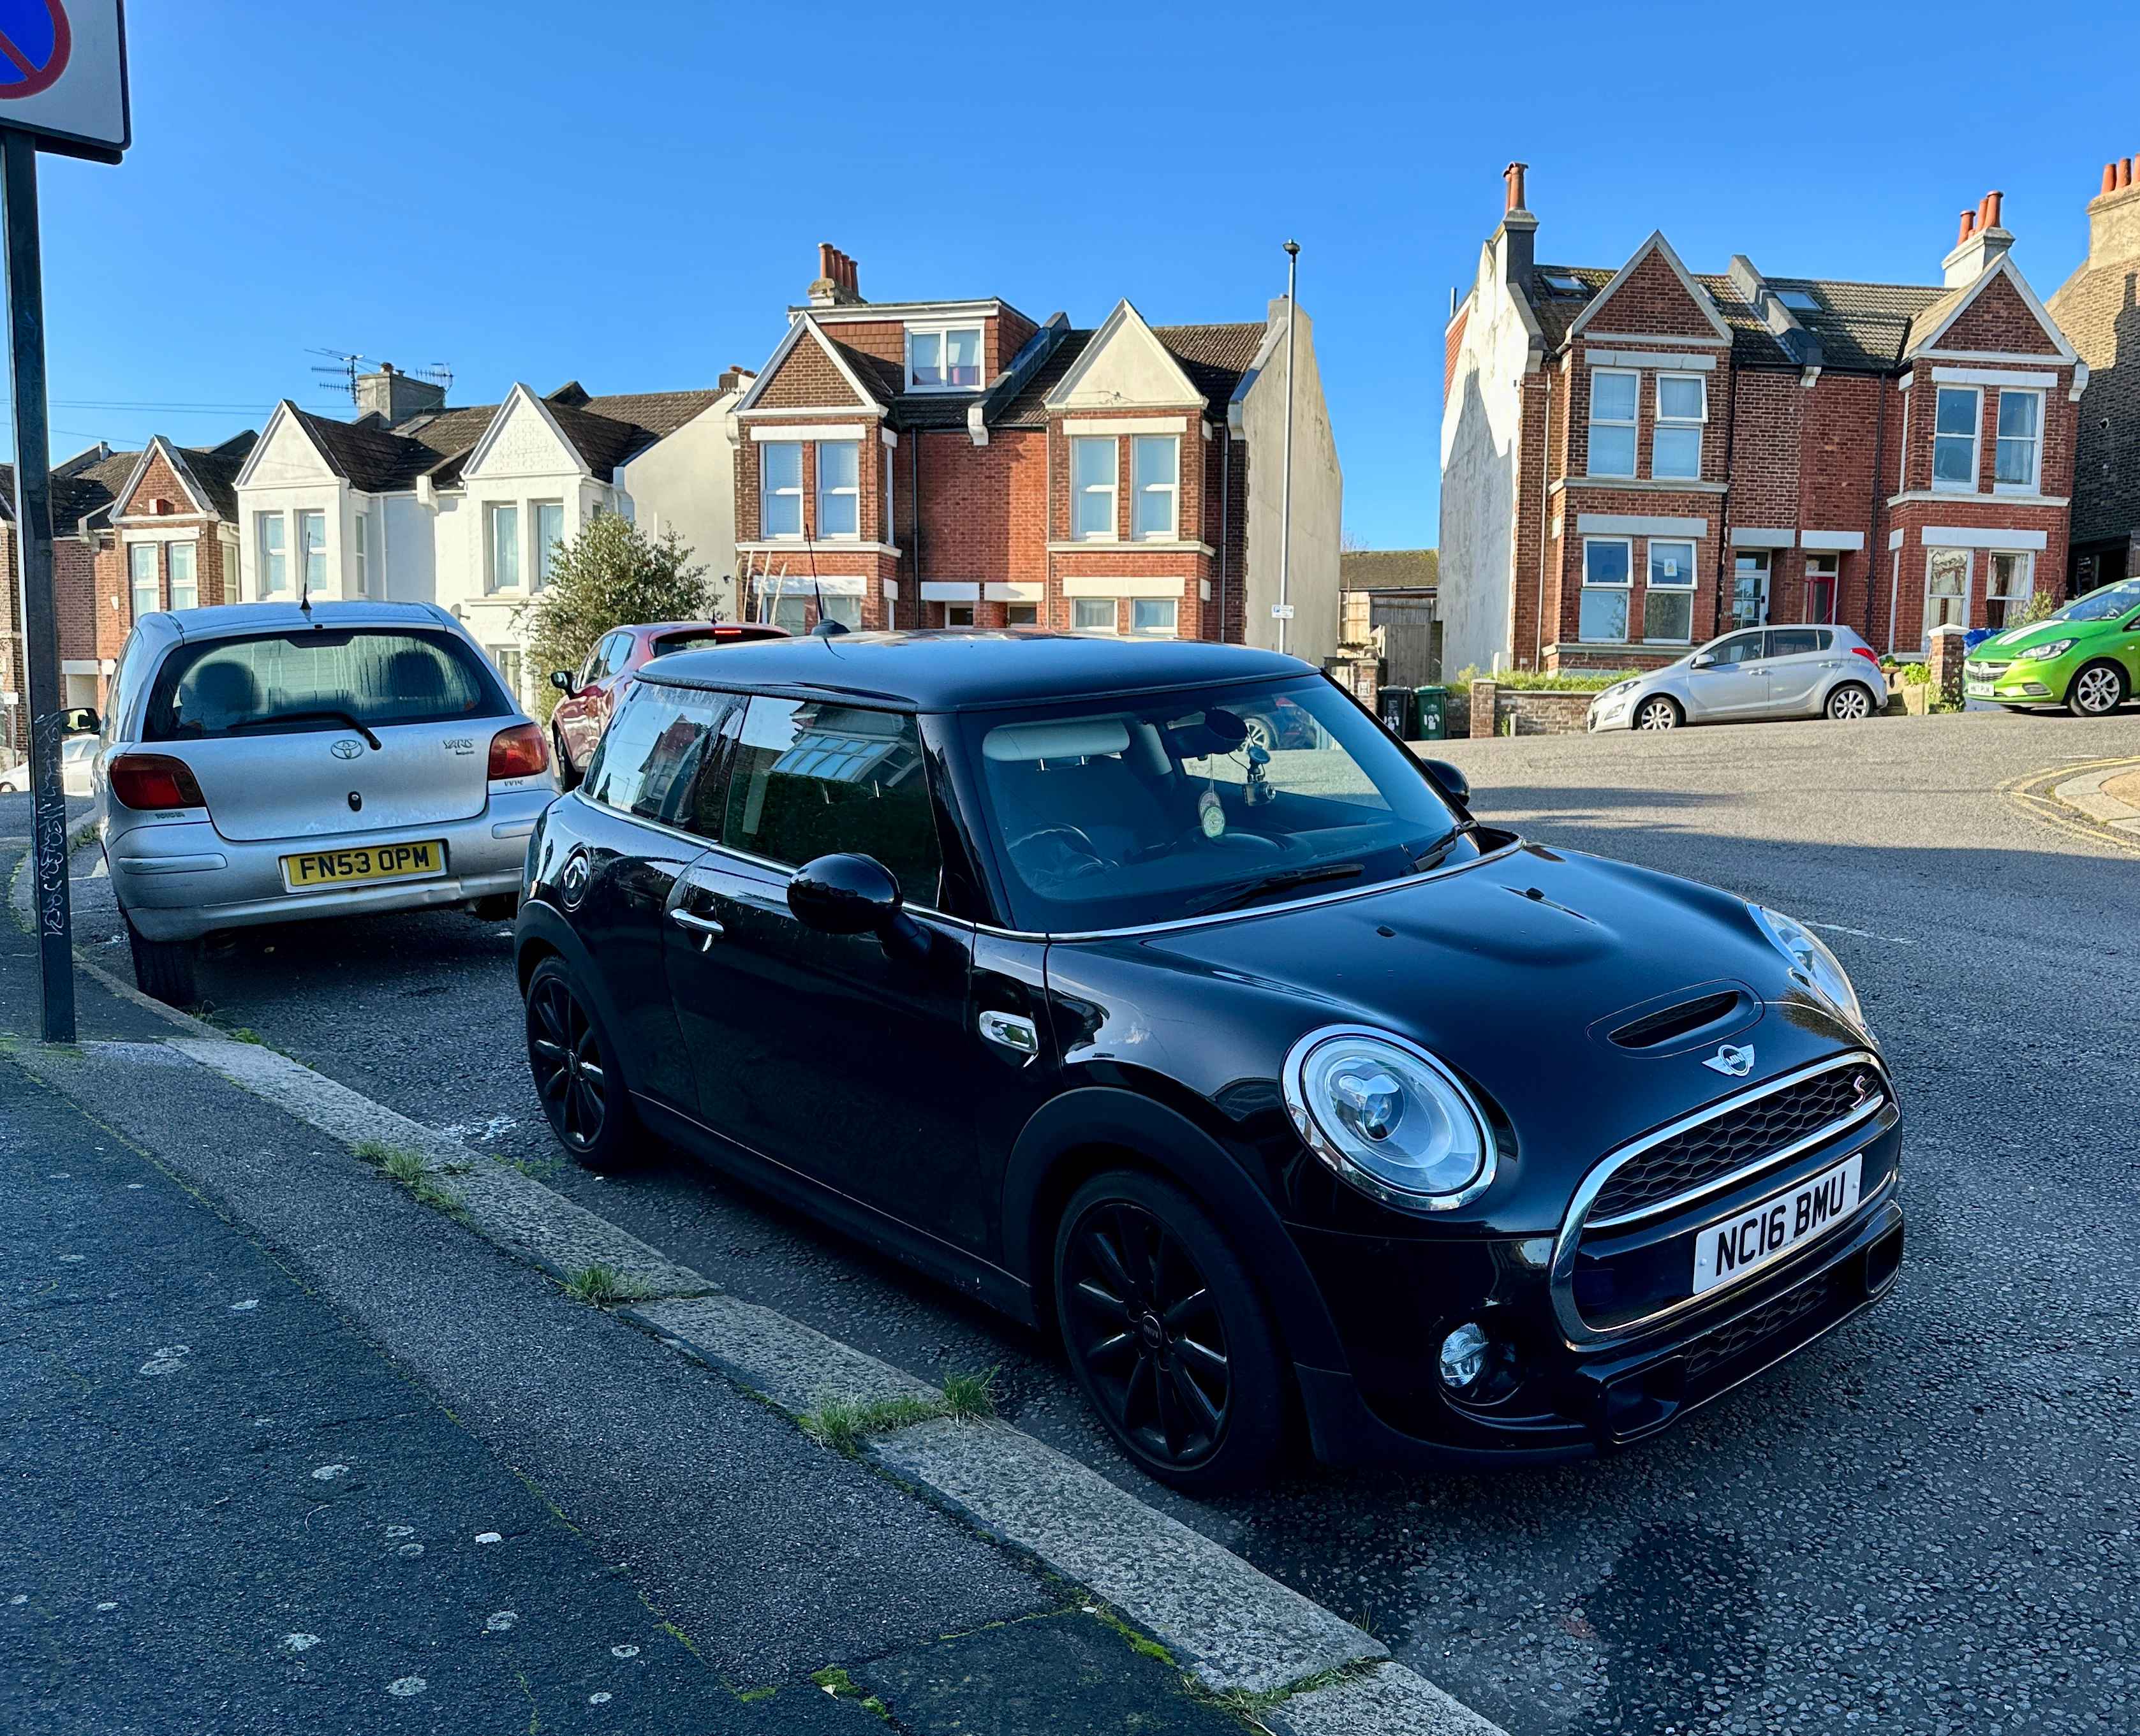 Photograph of NC16 BMU - a Black Mini Cooper parked in Hollingdean by a non-resident who uses the local area as part of their Brighton commute. The third of four photographs supplied by the residents of Hollingdean.